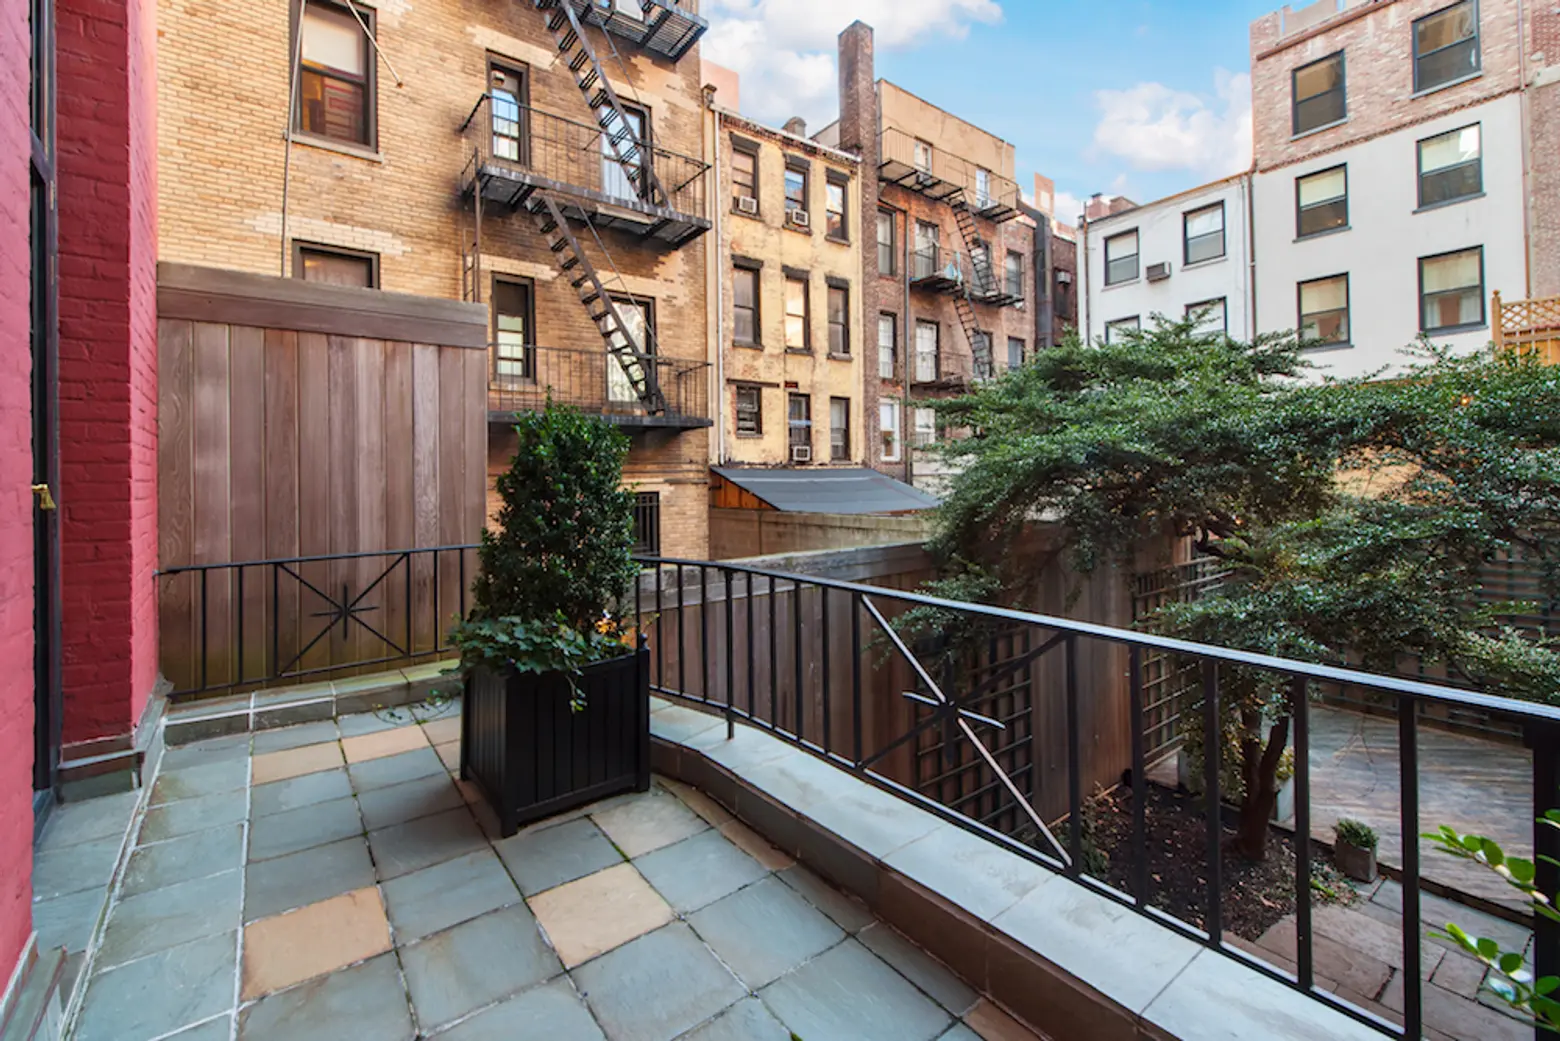 151 74th Street, Upper East Side, Townhouses, cool listings, Henry fonda, Manhattan Townhouse for sale